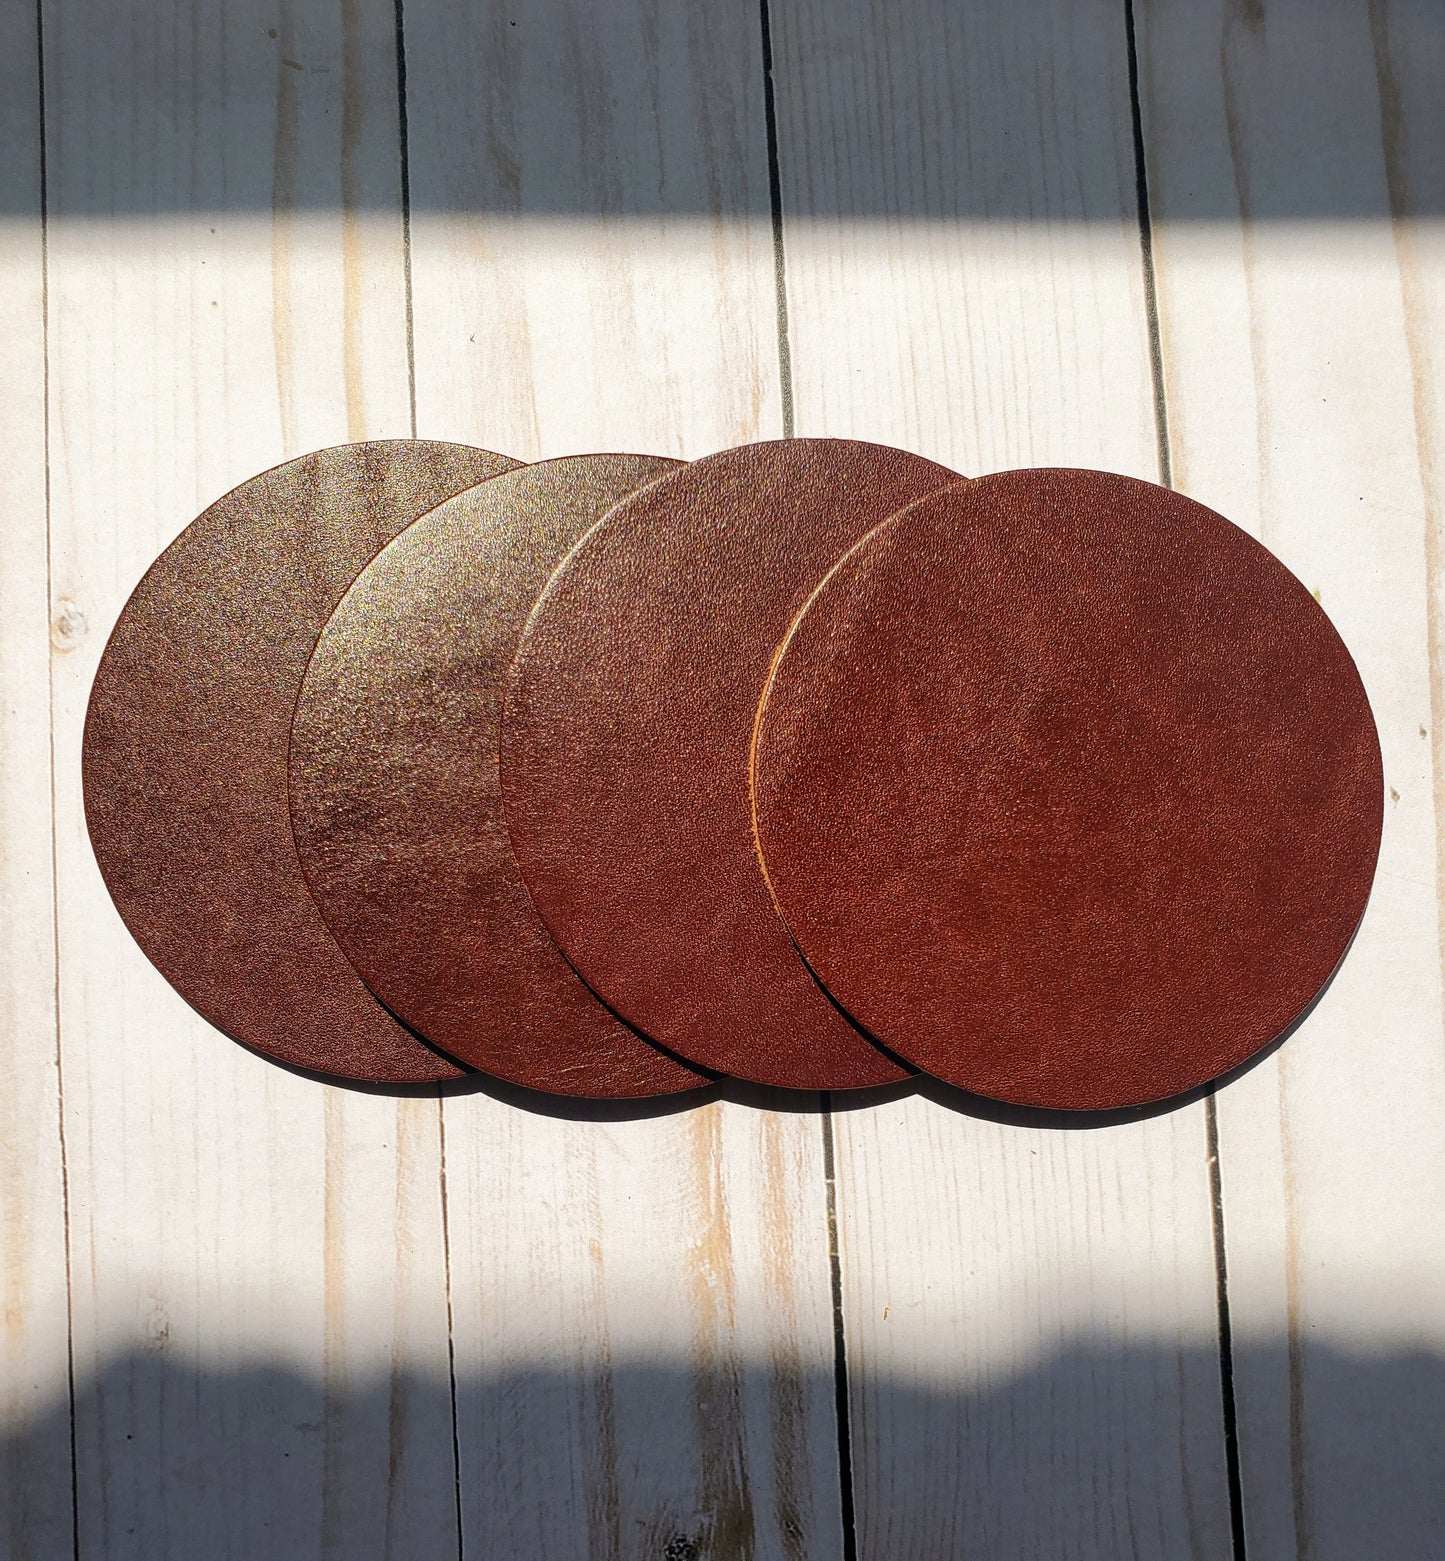 Burgundy/Brown round leather coaster set of 4 made in Los Angeles,California